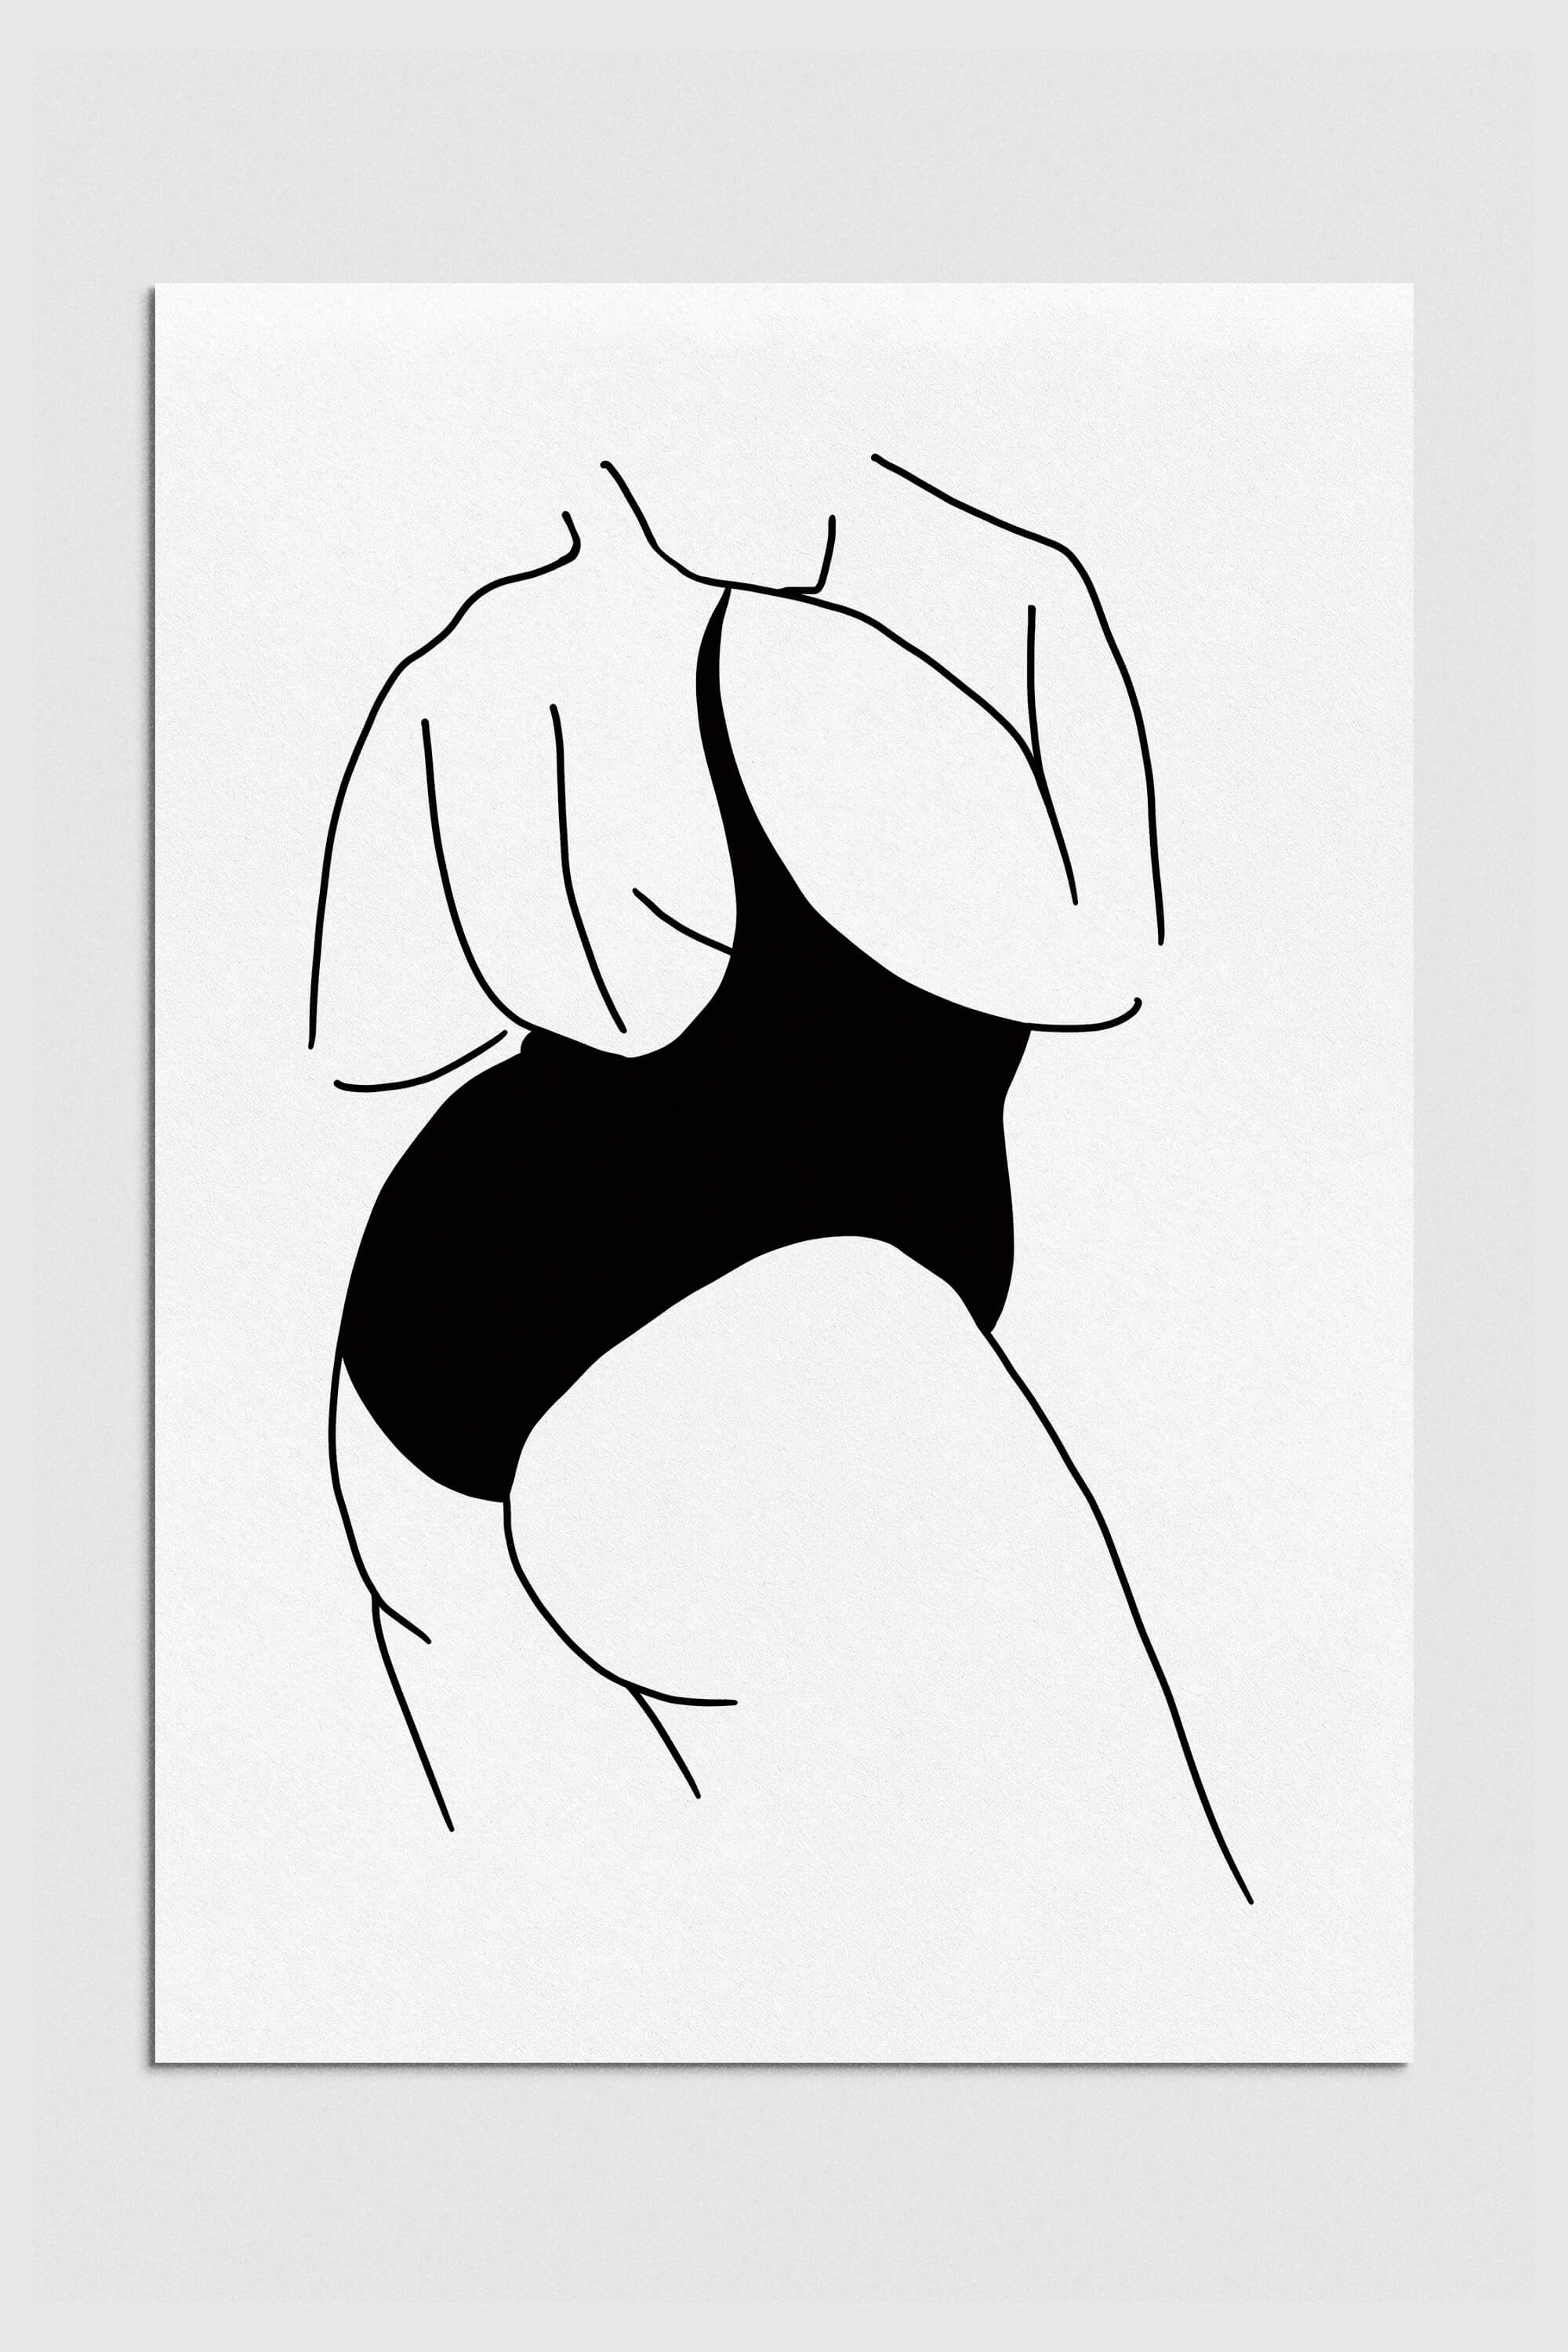 Depicting a confident curvy woman in minimalist lines. Bold strokes celebrate feminine strength and beauty. Monochrome tones create a timeless aesthetic for modern spaces.